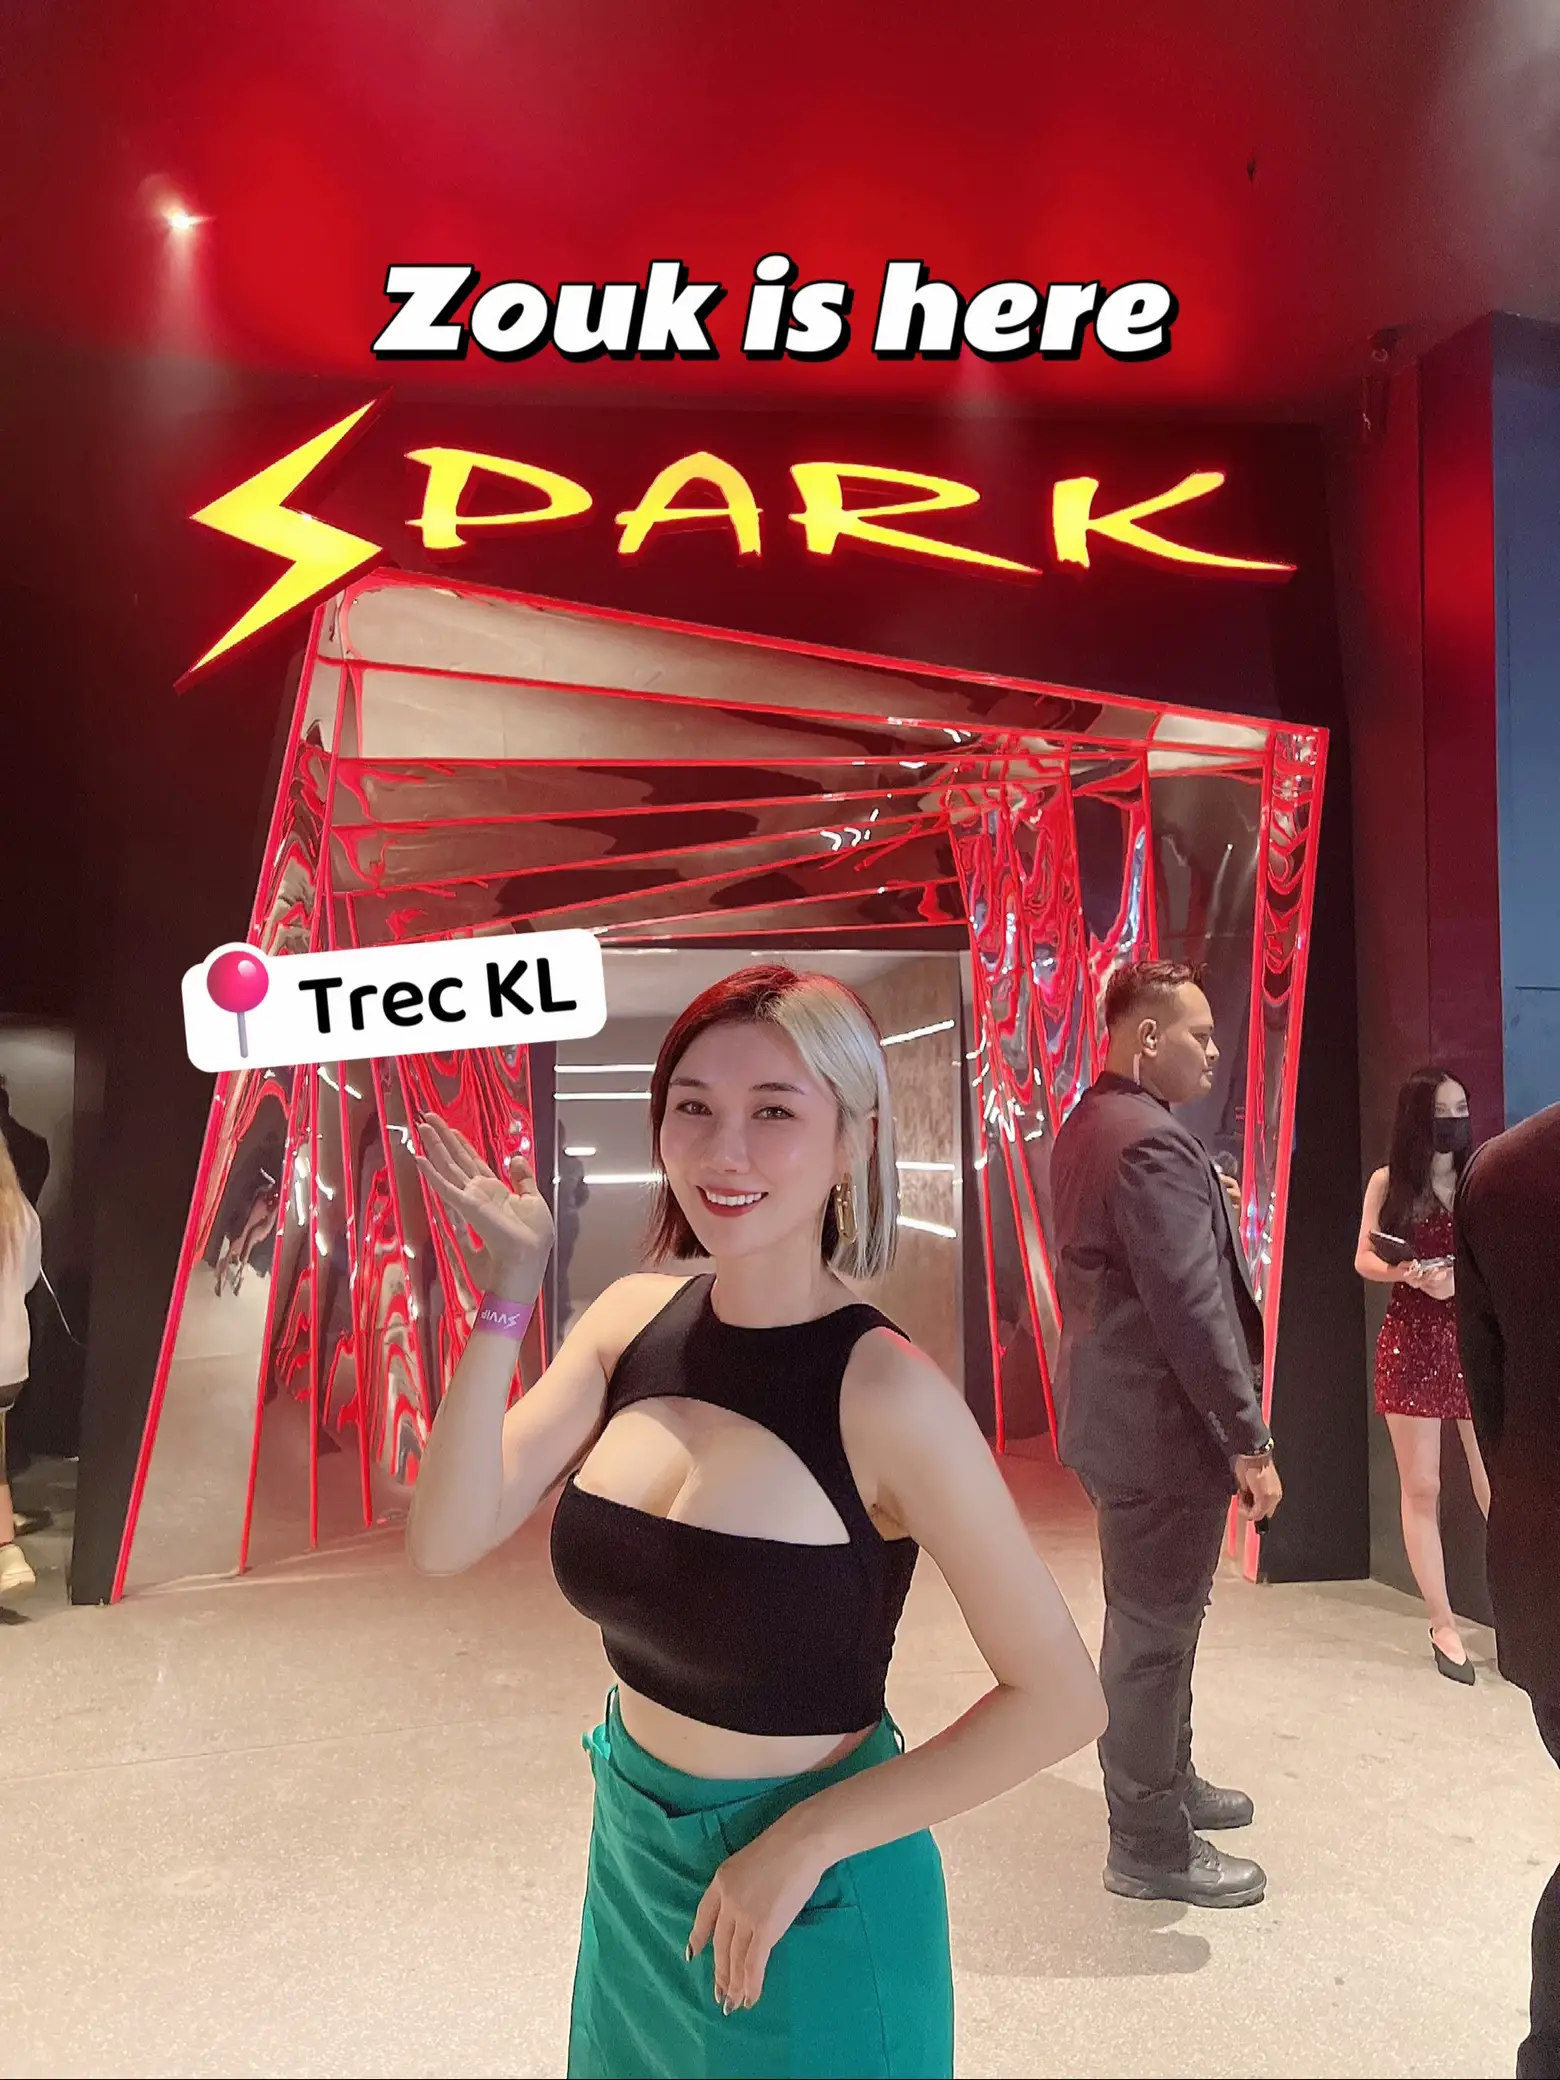 Zouk change to spark ⭐️